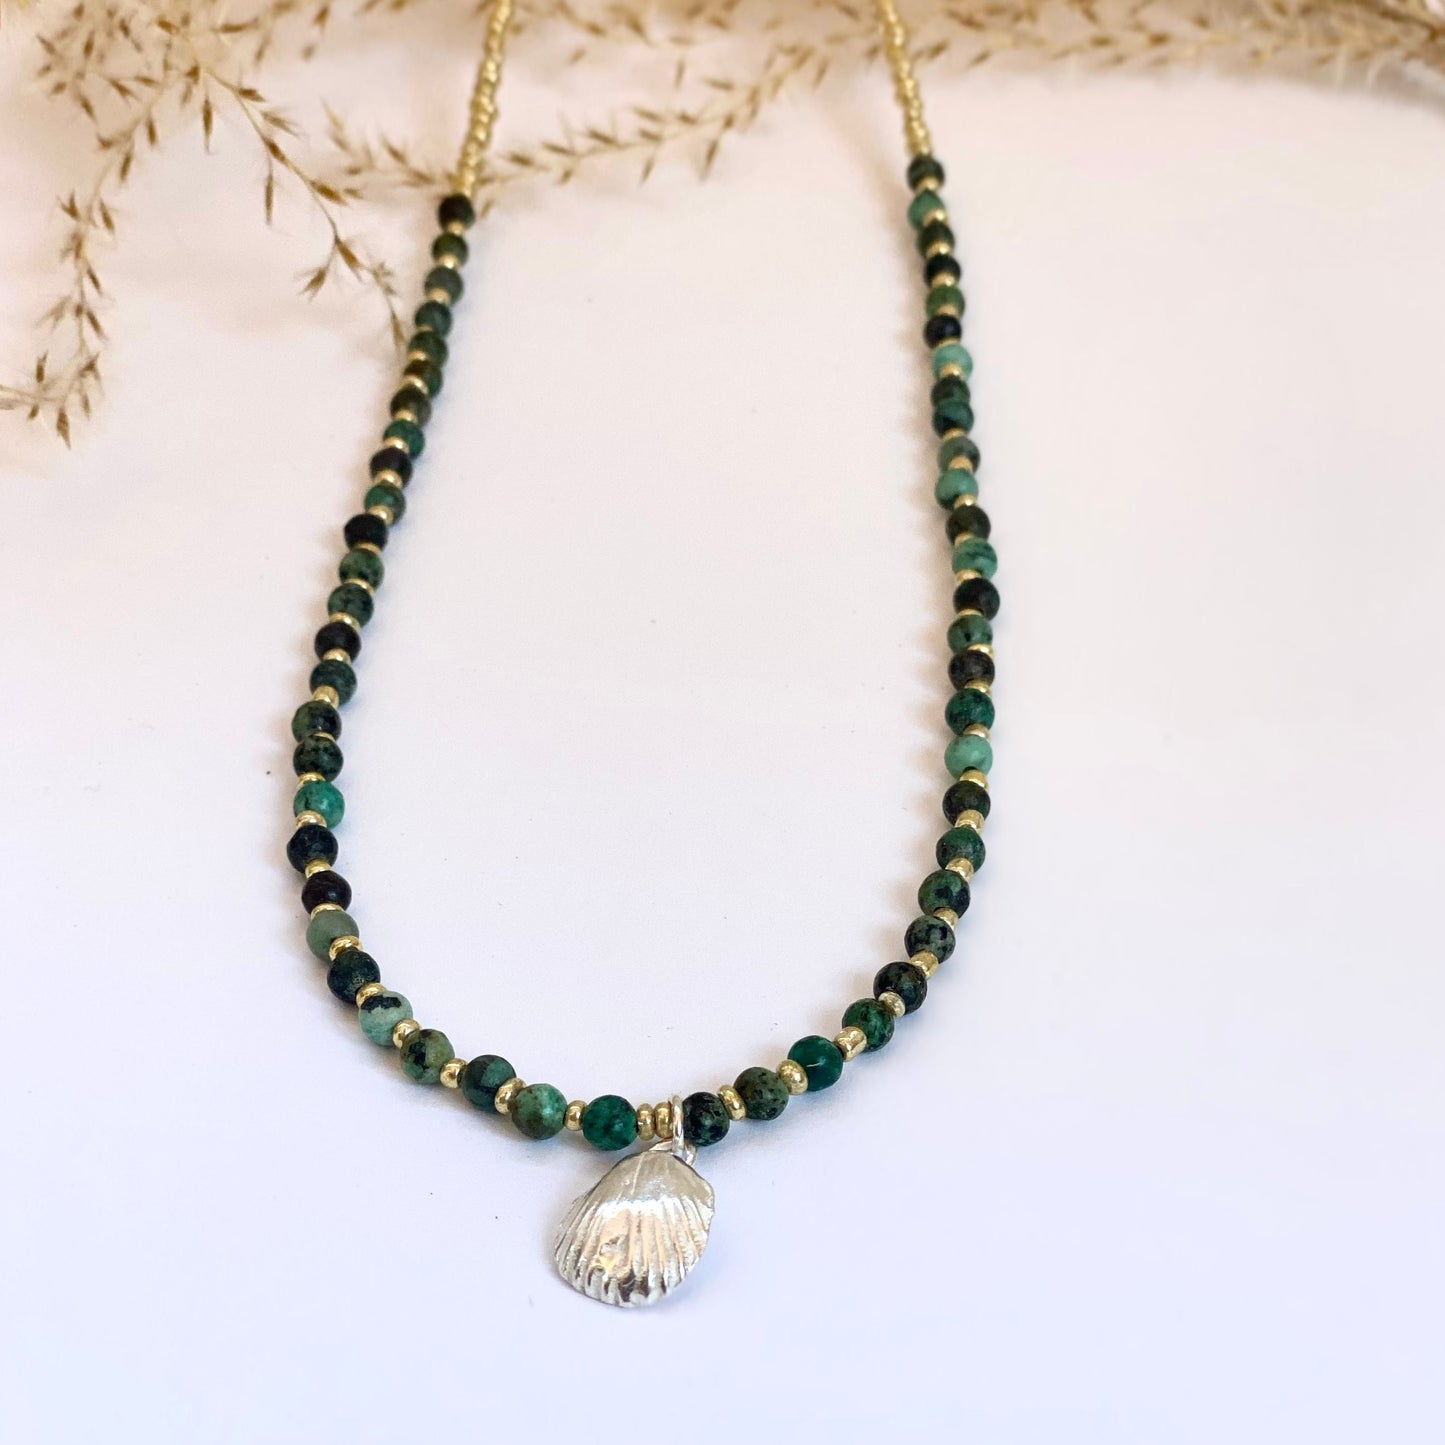 Turquoise Sea Charm Necklace - Love Beach Beads